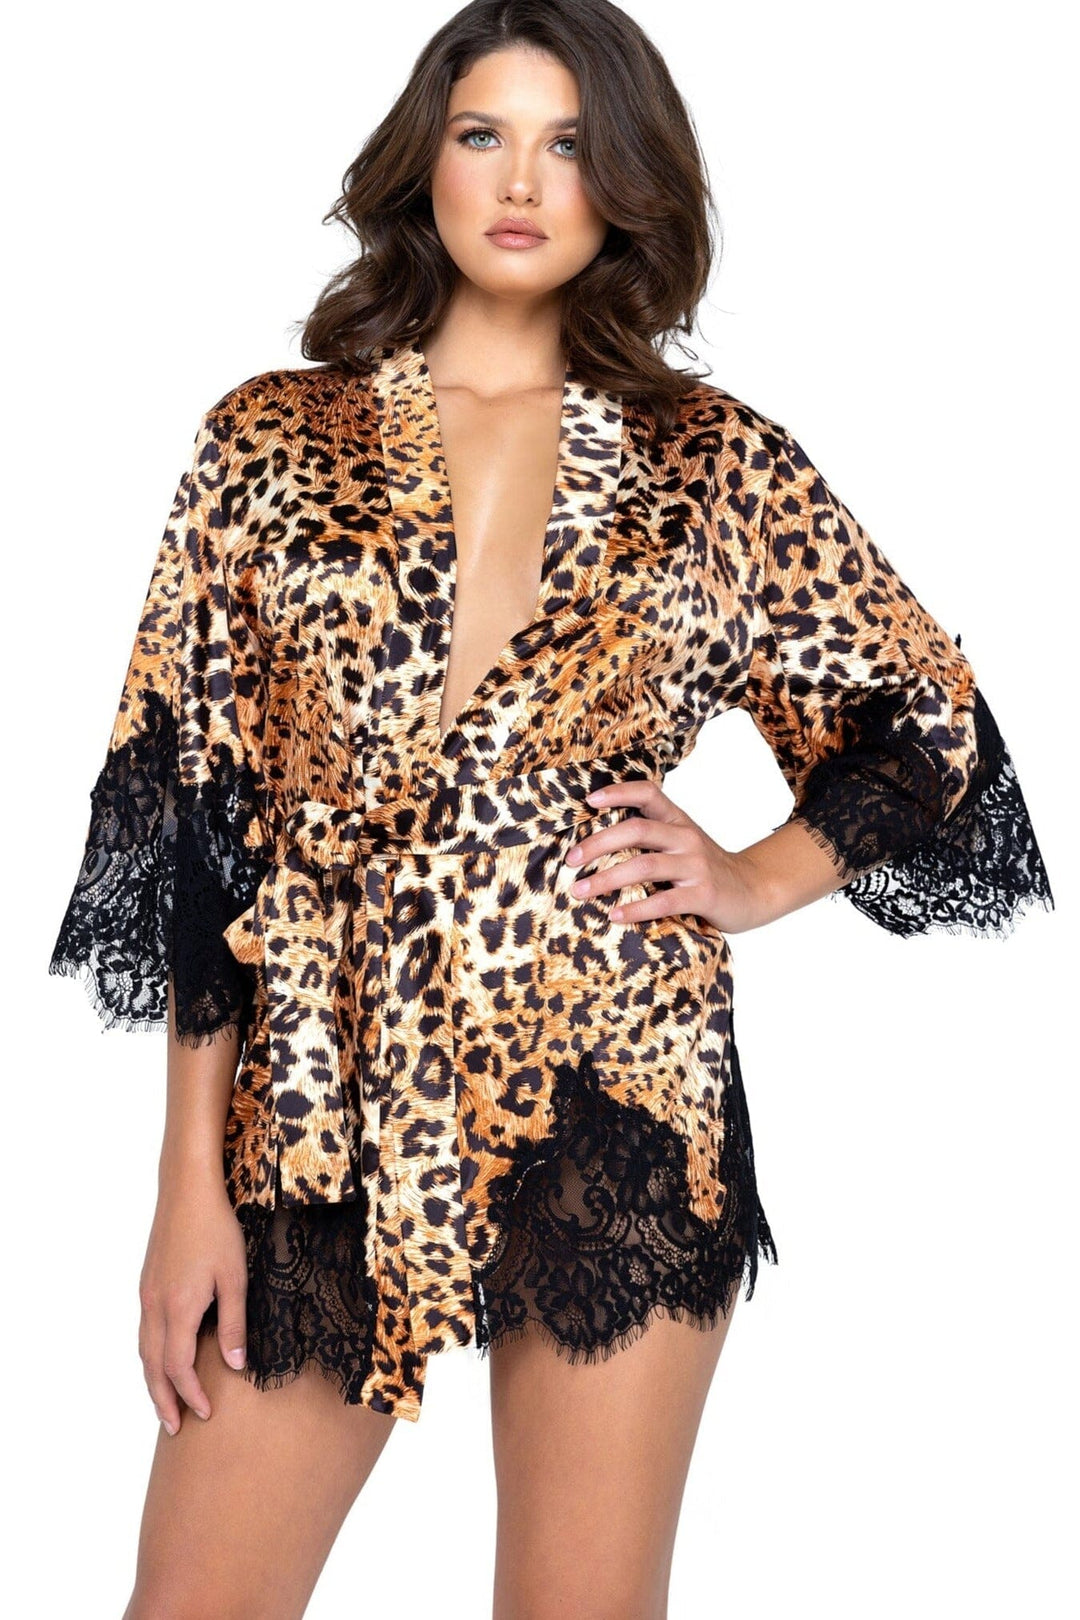 Jungle Fever Robe-Gowns + Robes-Roma Confidential-Animal-1X/2X-SEXYSHOES.COM